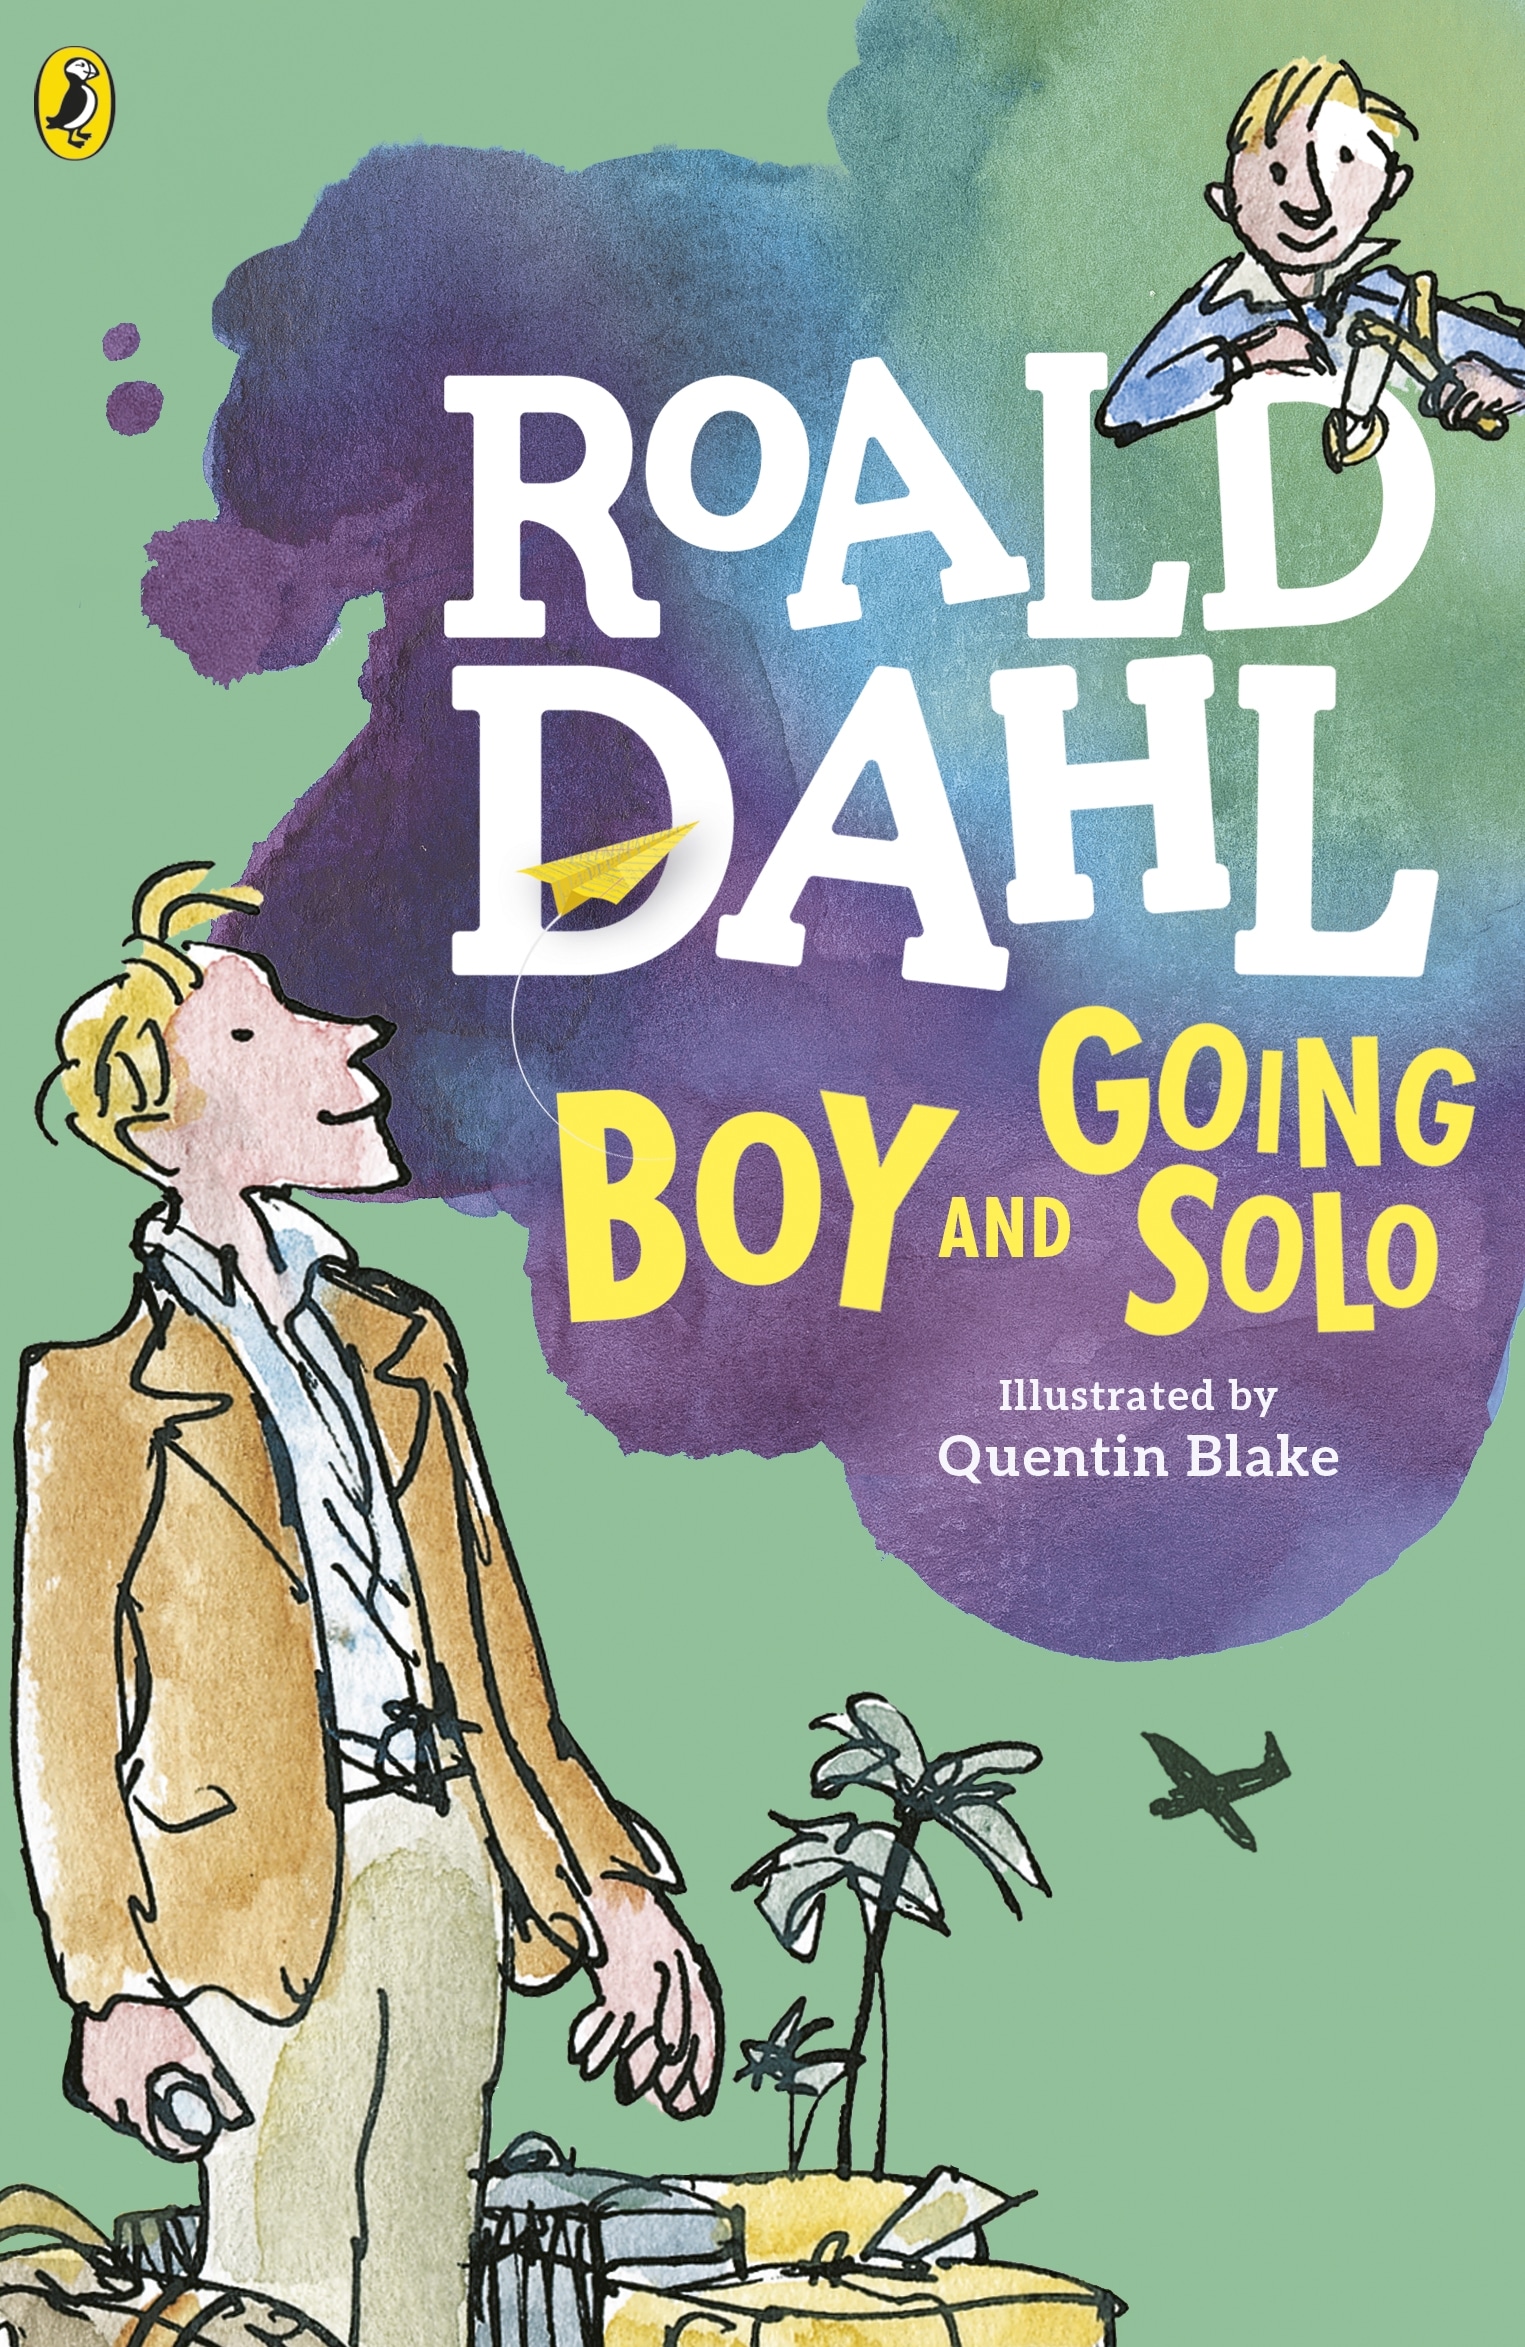 Book “Boy and Going Solo” by Roald Dahl — February 11, 2016